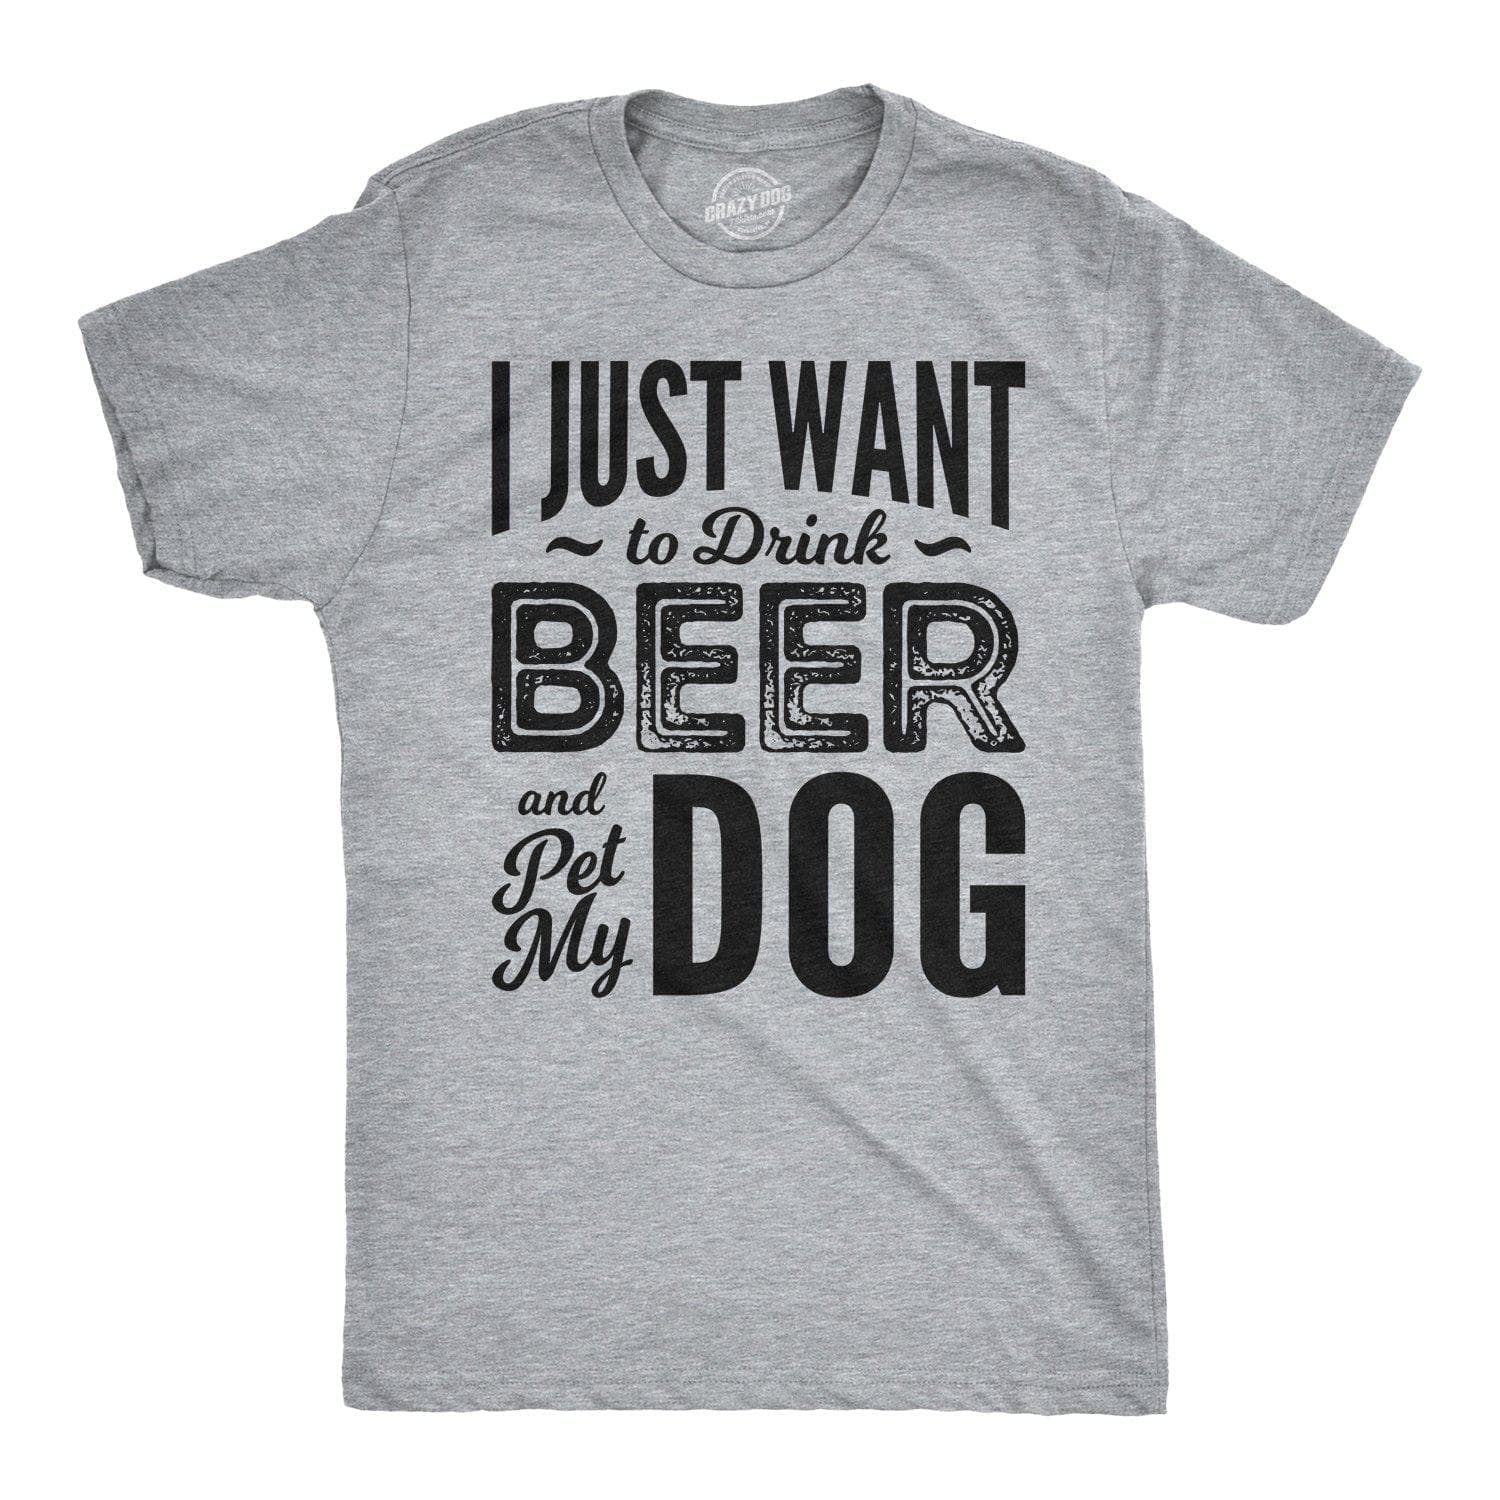 I Just Want To Drink Beer and Pet My Dog Men's Tshirt  -  Crazy Dog T-Shirts